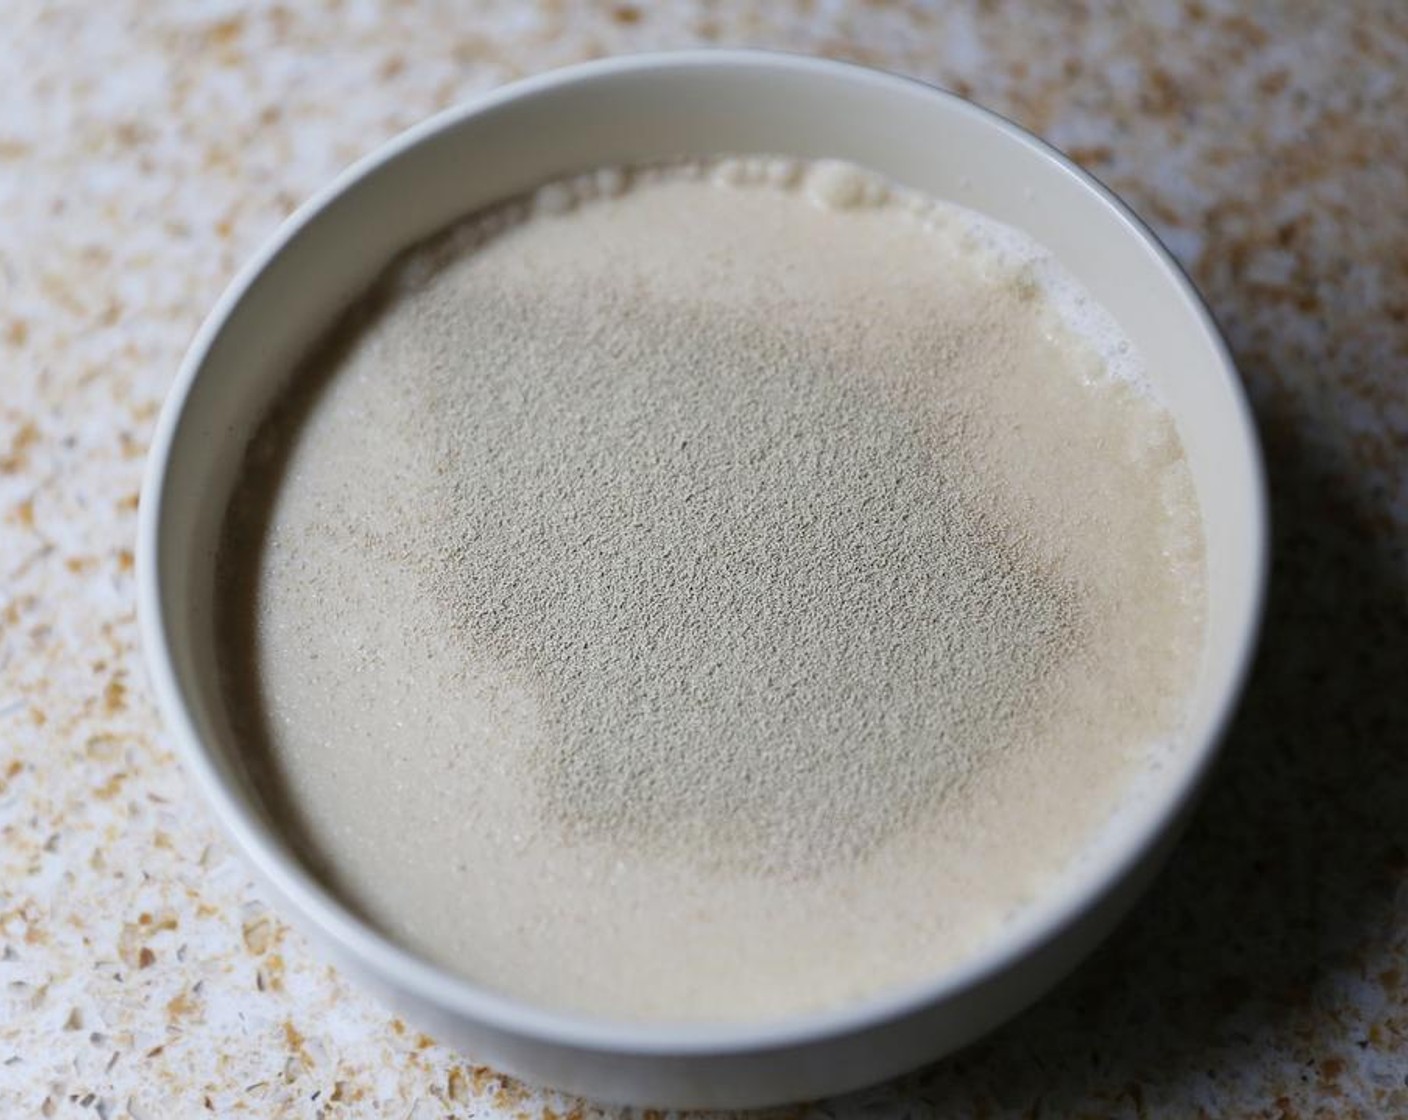 step 1 Warm the Milk (1 1/2 cups) to around 115 degrees F (45 degrees C). Add to a small bowl, add the Granulated Sugar (1 pinch) and sprinkle over the Instant Dry Yeast (1/2 Tbsp).